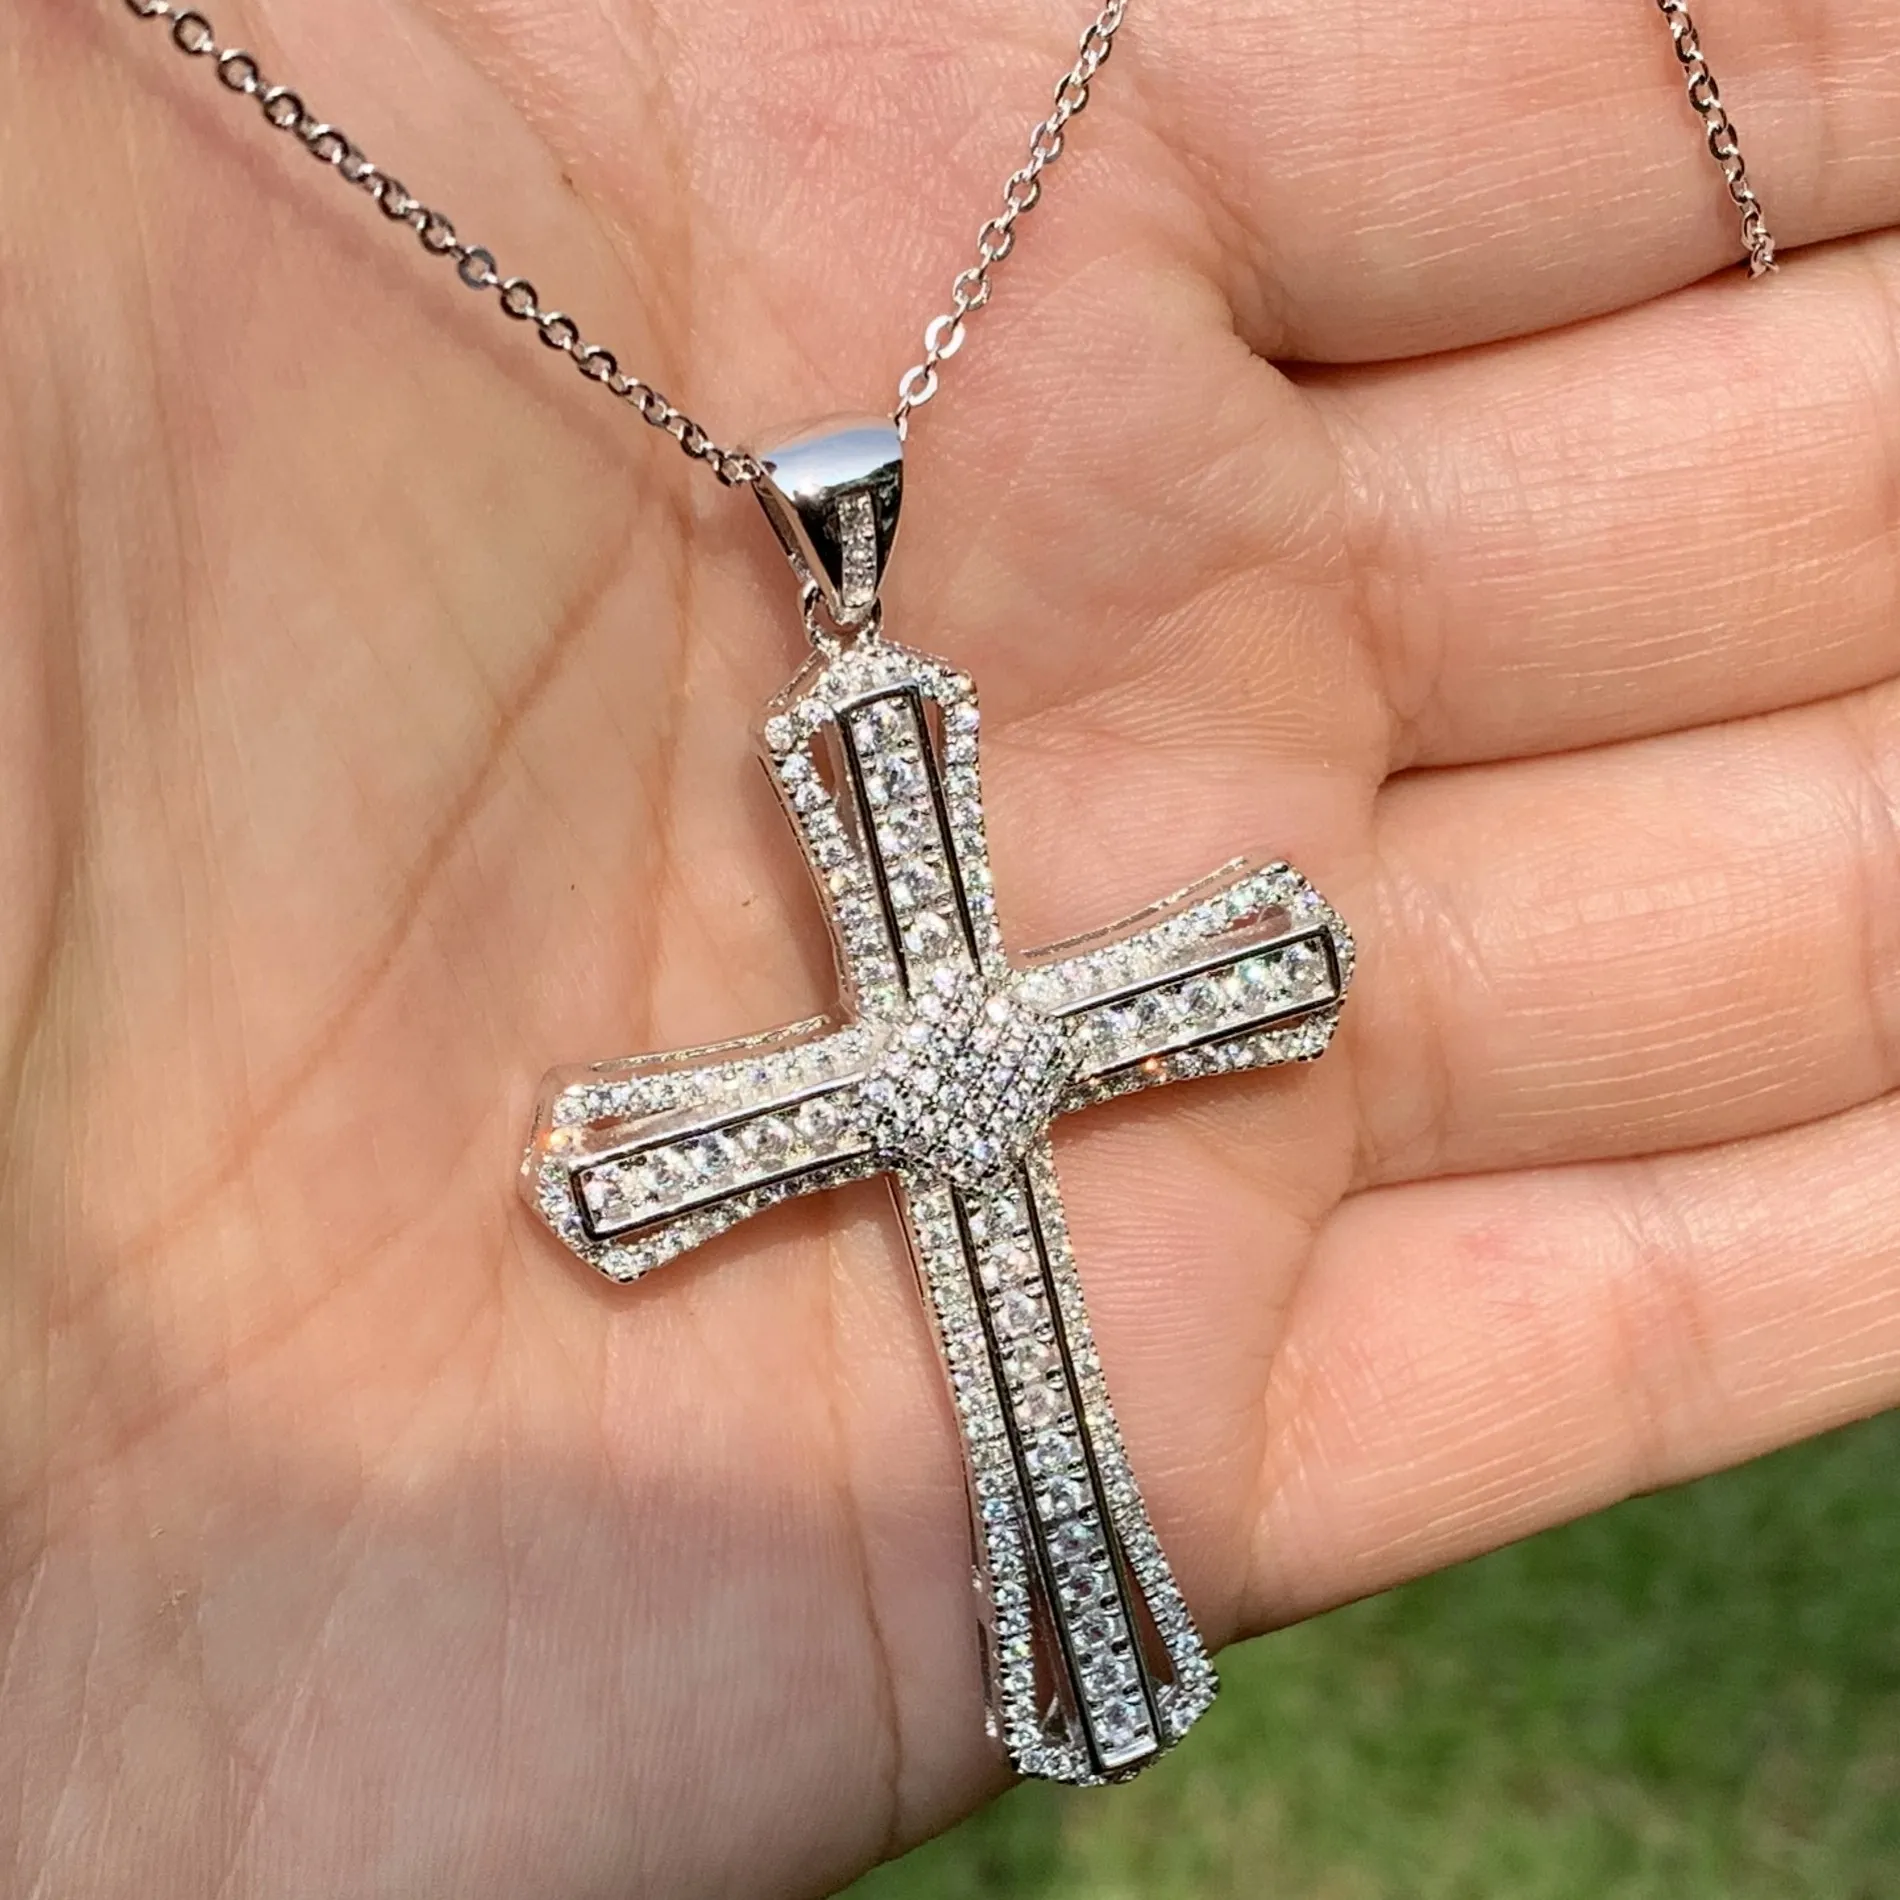 Choucong Brand New Unique Luxury Jewelry Cross Pendant 925 Sterling Silver Pave White Clear 5A Cubic Zirconia CZ Women Necklace Wi228s